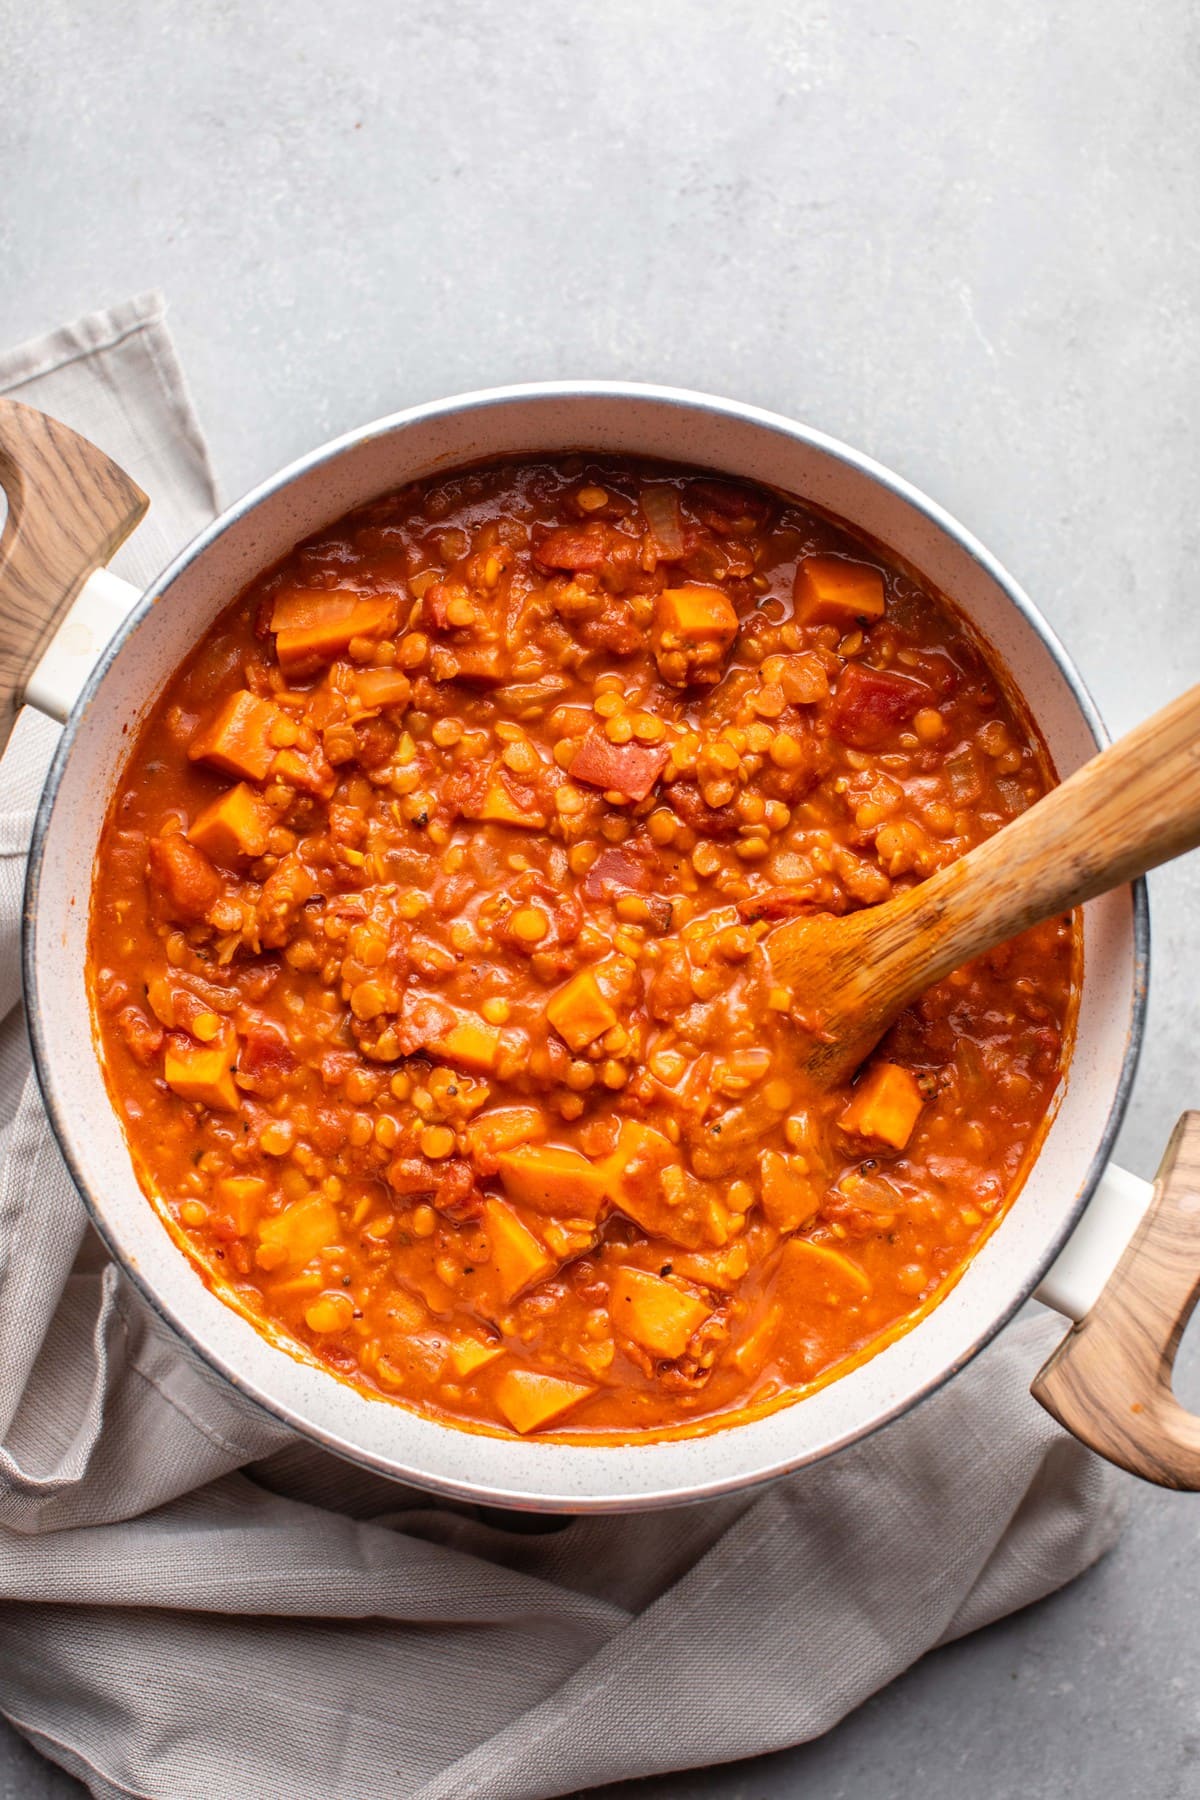 pot of sweet potato red lentil and peanut stew with wooden spoon